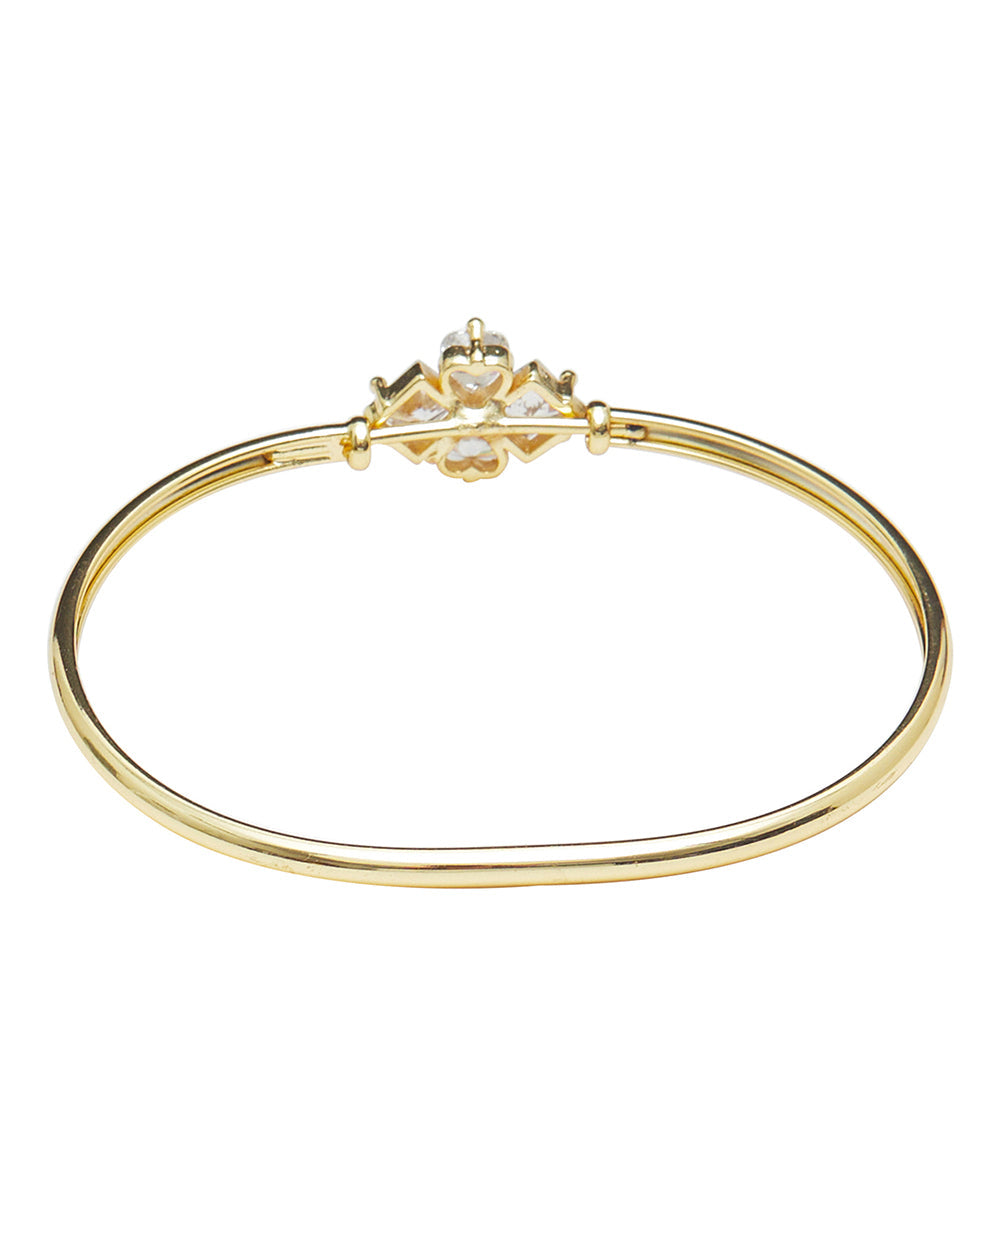 Women's Floral Design Bracelet With Gold Finish And Zircons - Voylla